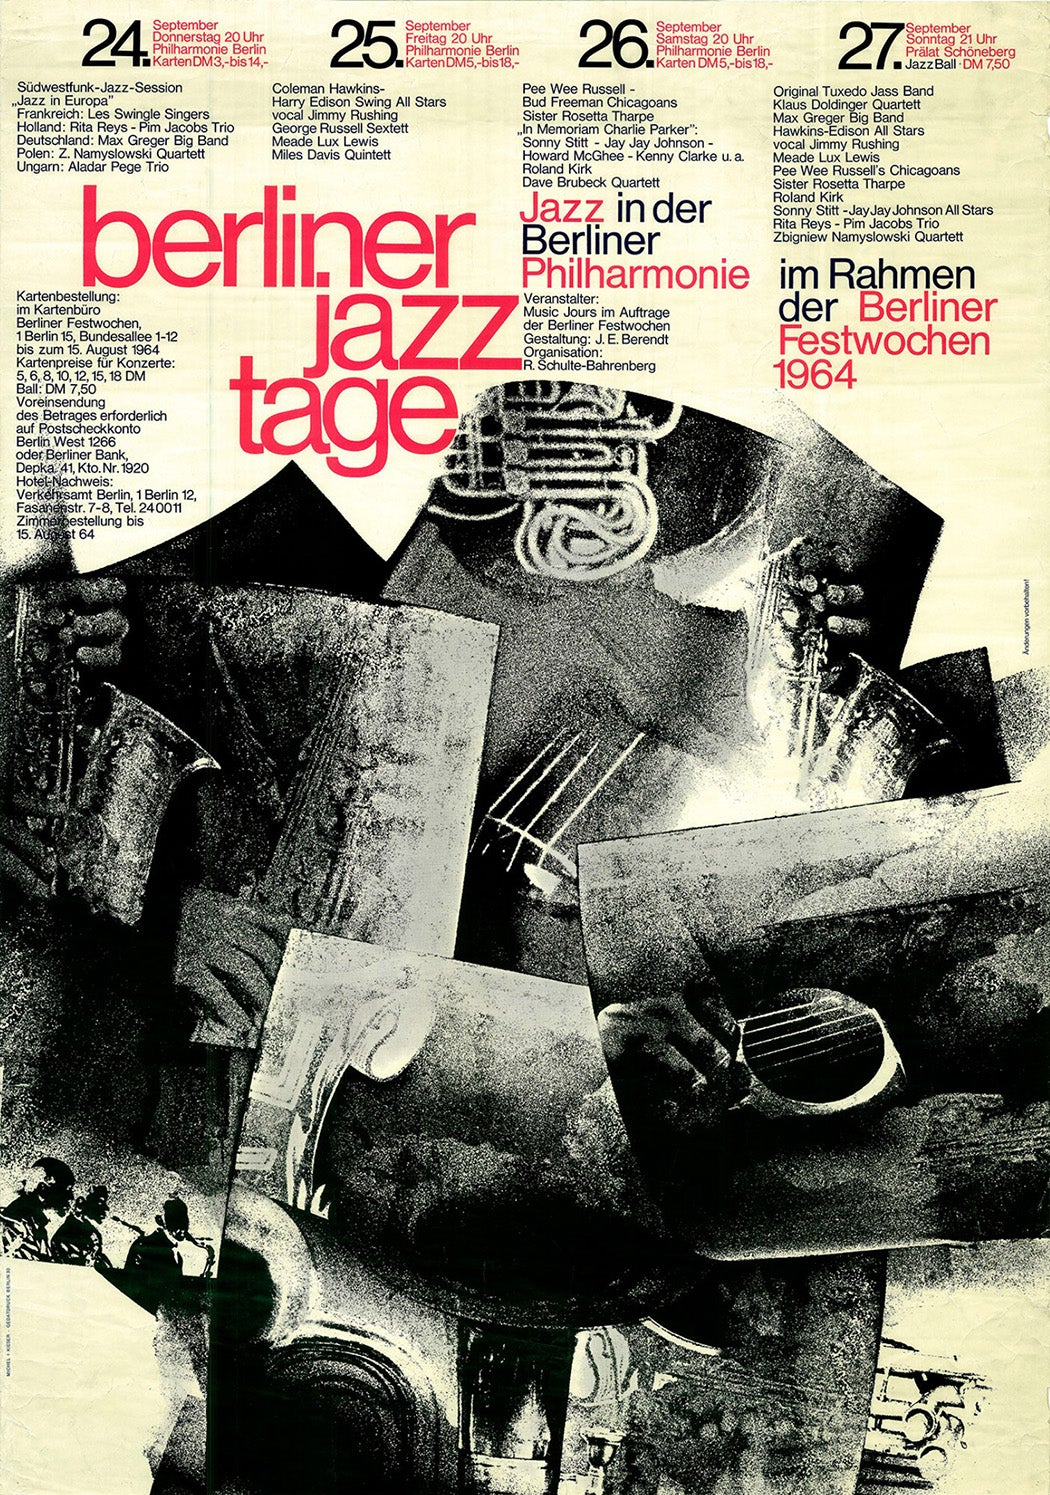 A poster for the 1964 Berlin Jazz Festival